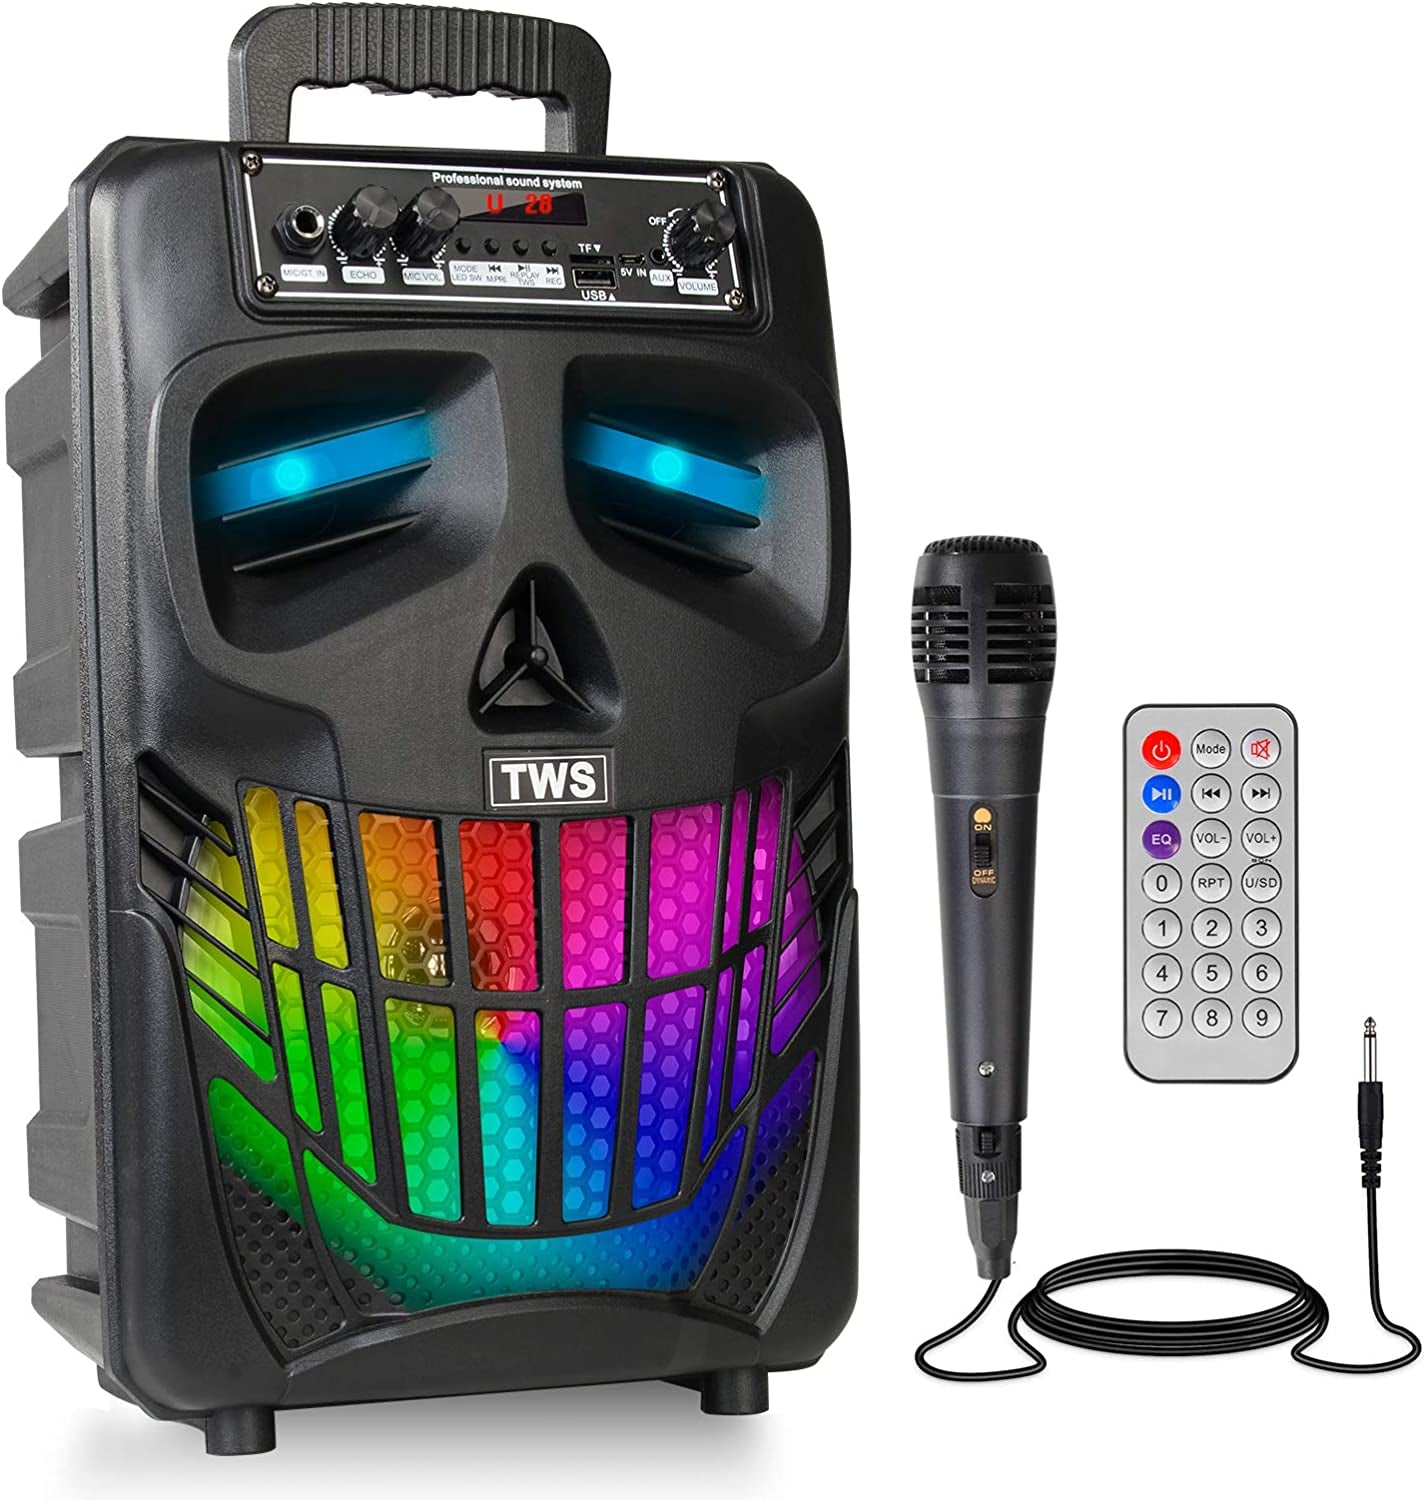 Portable Wireless Bluetooth Karaoke Machine with Rechargeable PA System, Lights, Microphone - Ideal for Home, Outdoor Parties, Birthdays, and Christmas Gifts